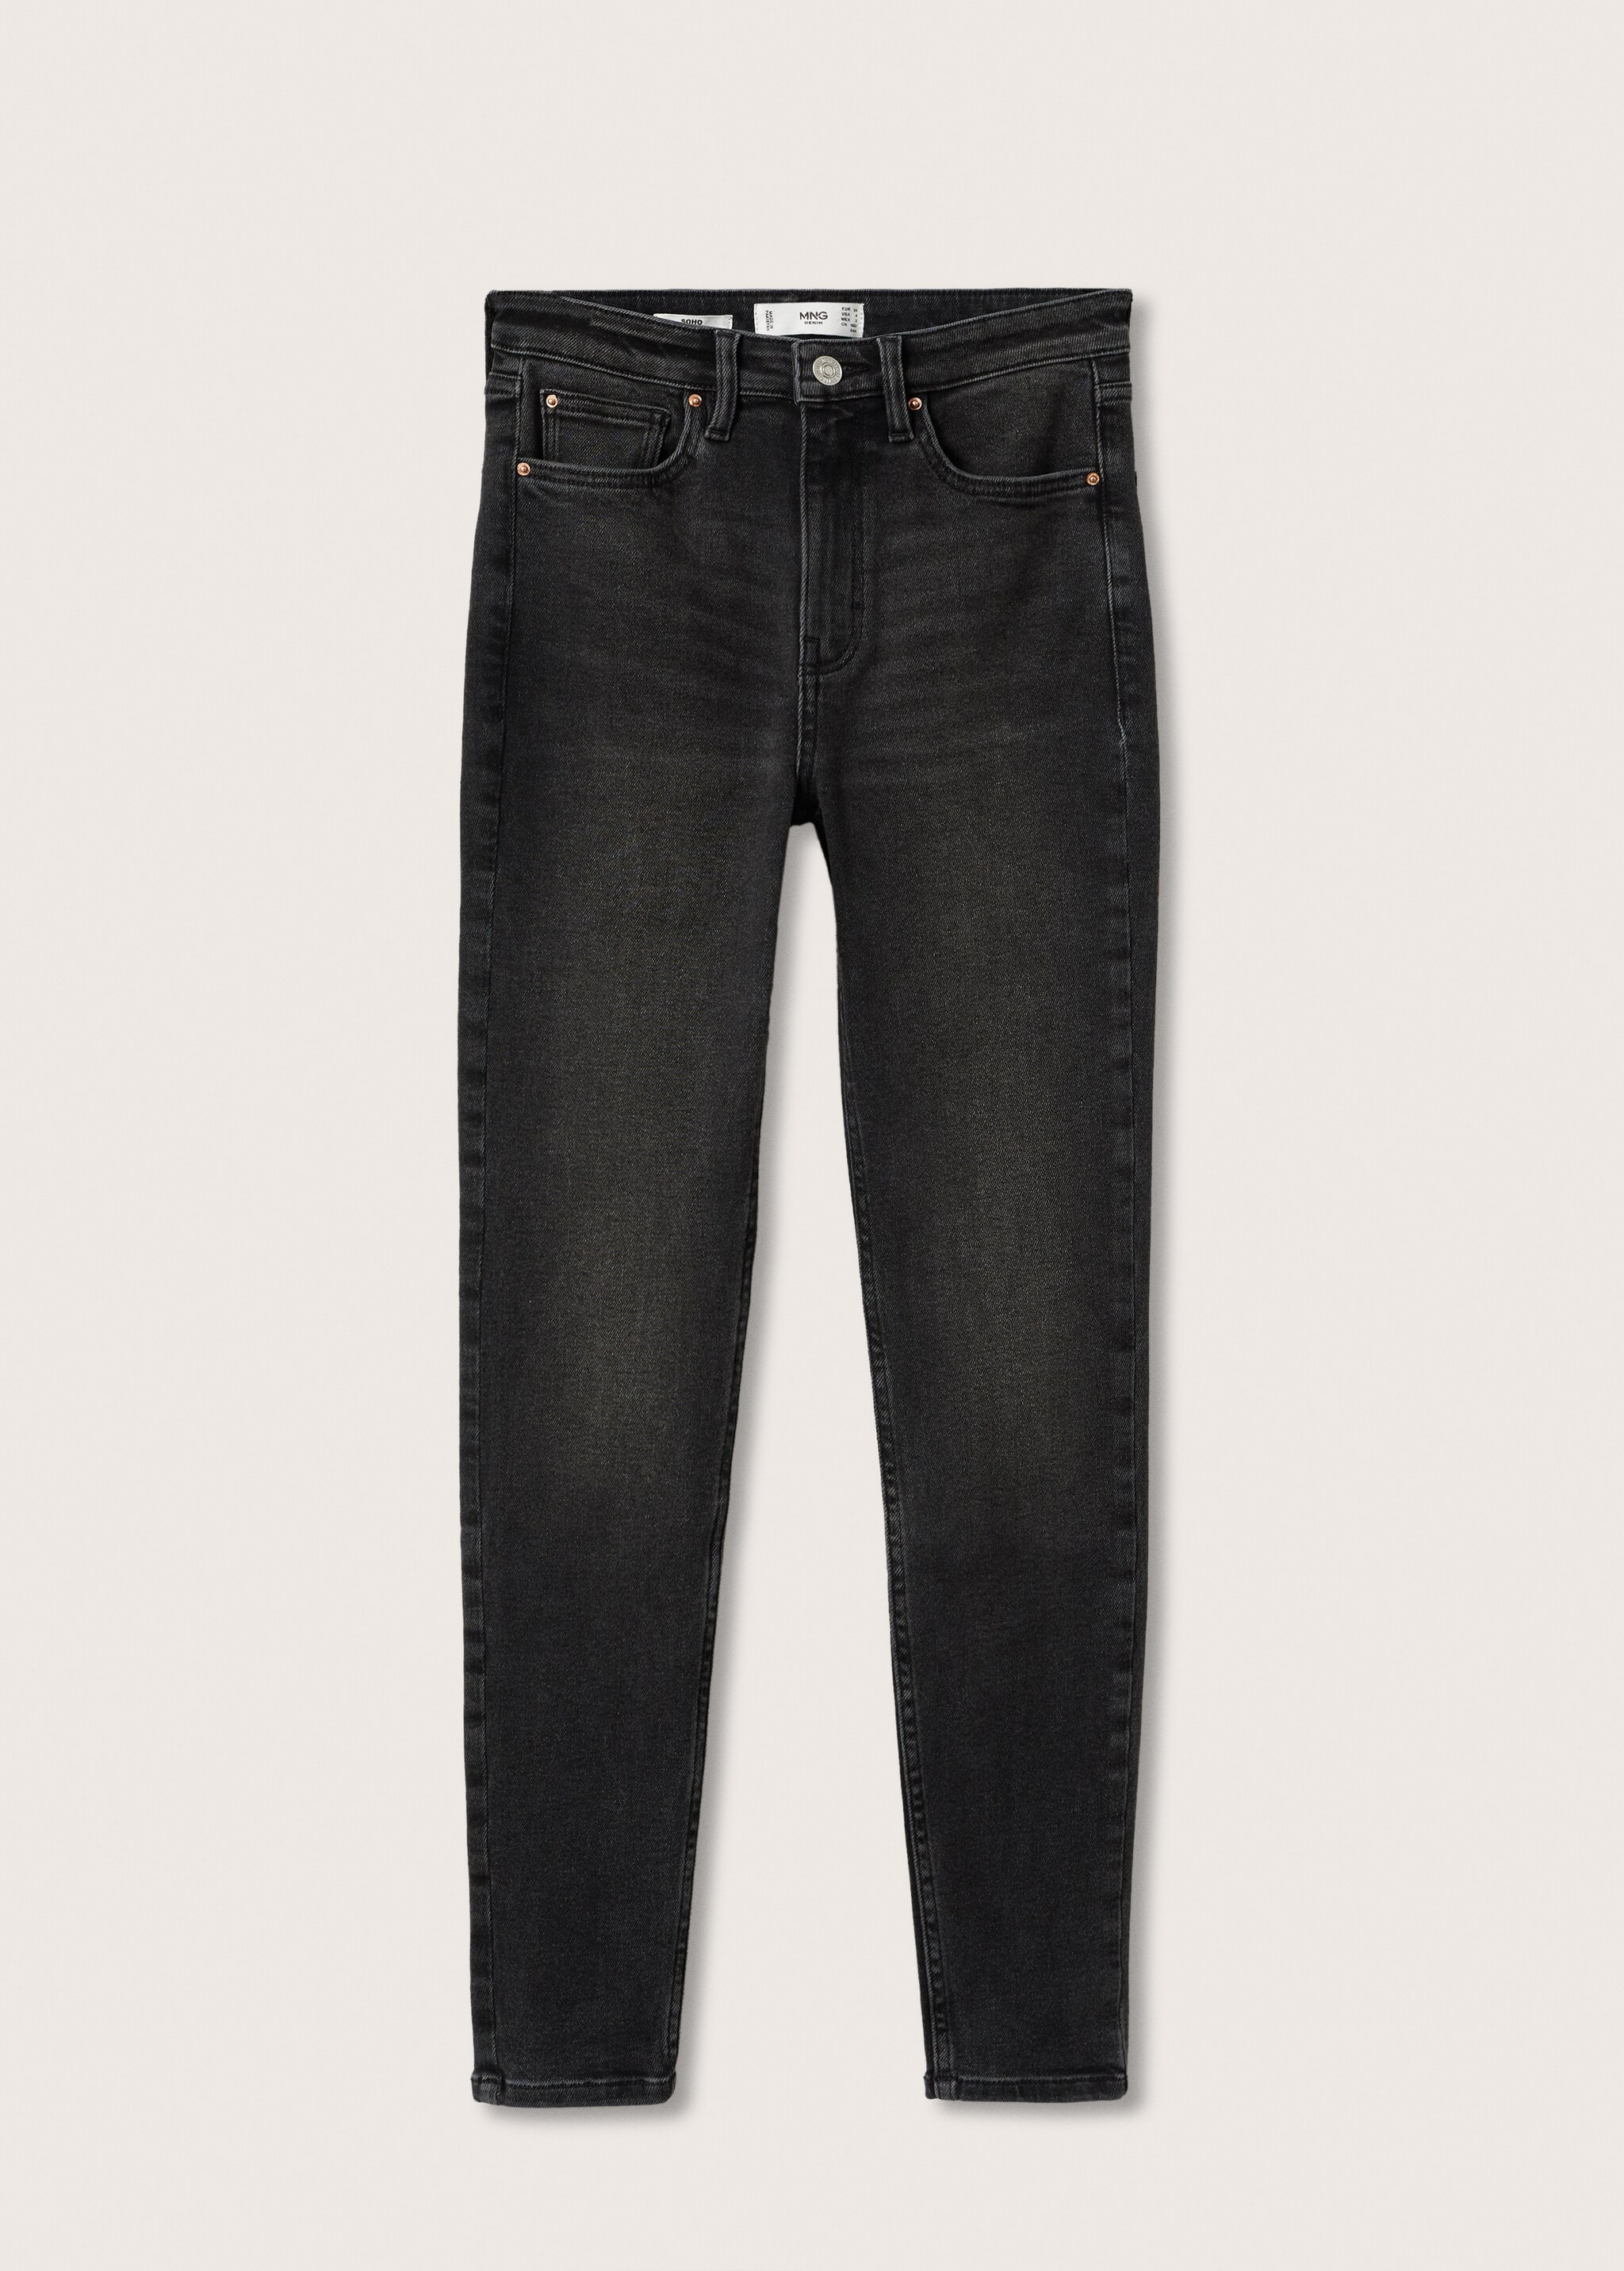 Soho high-waist skinny jeans - Article without model